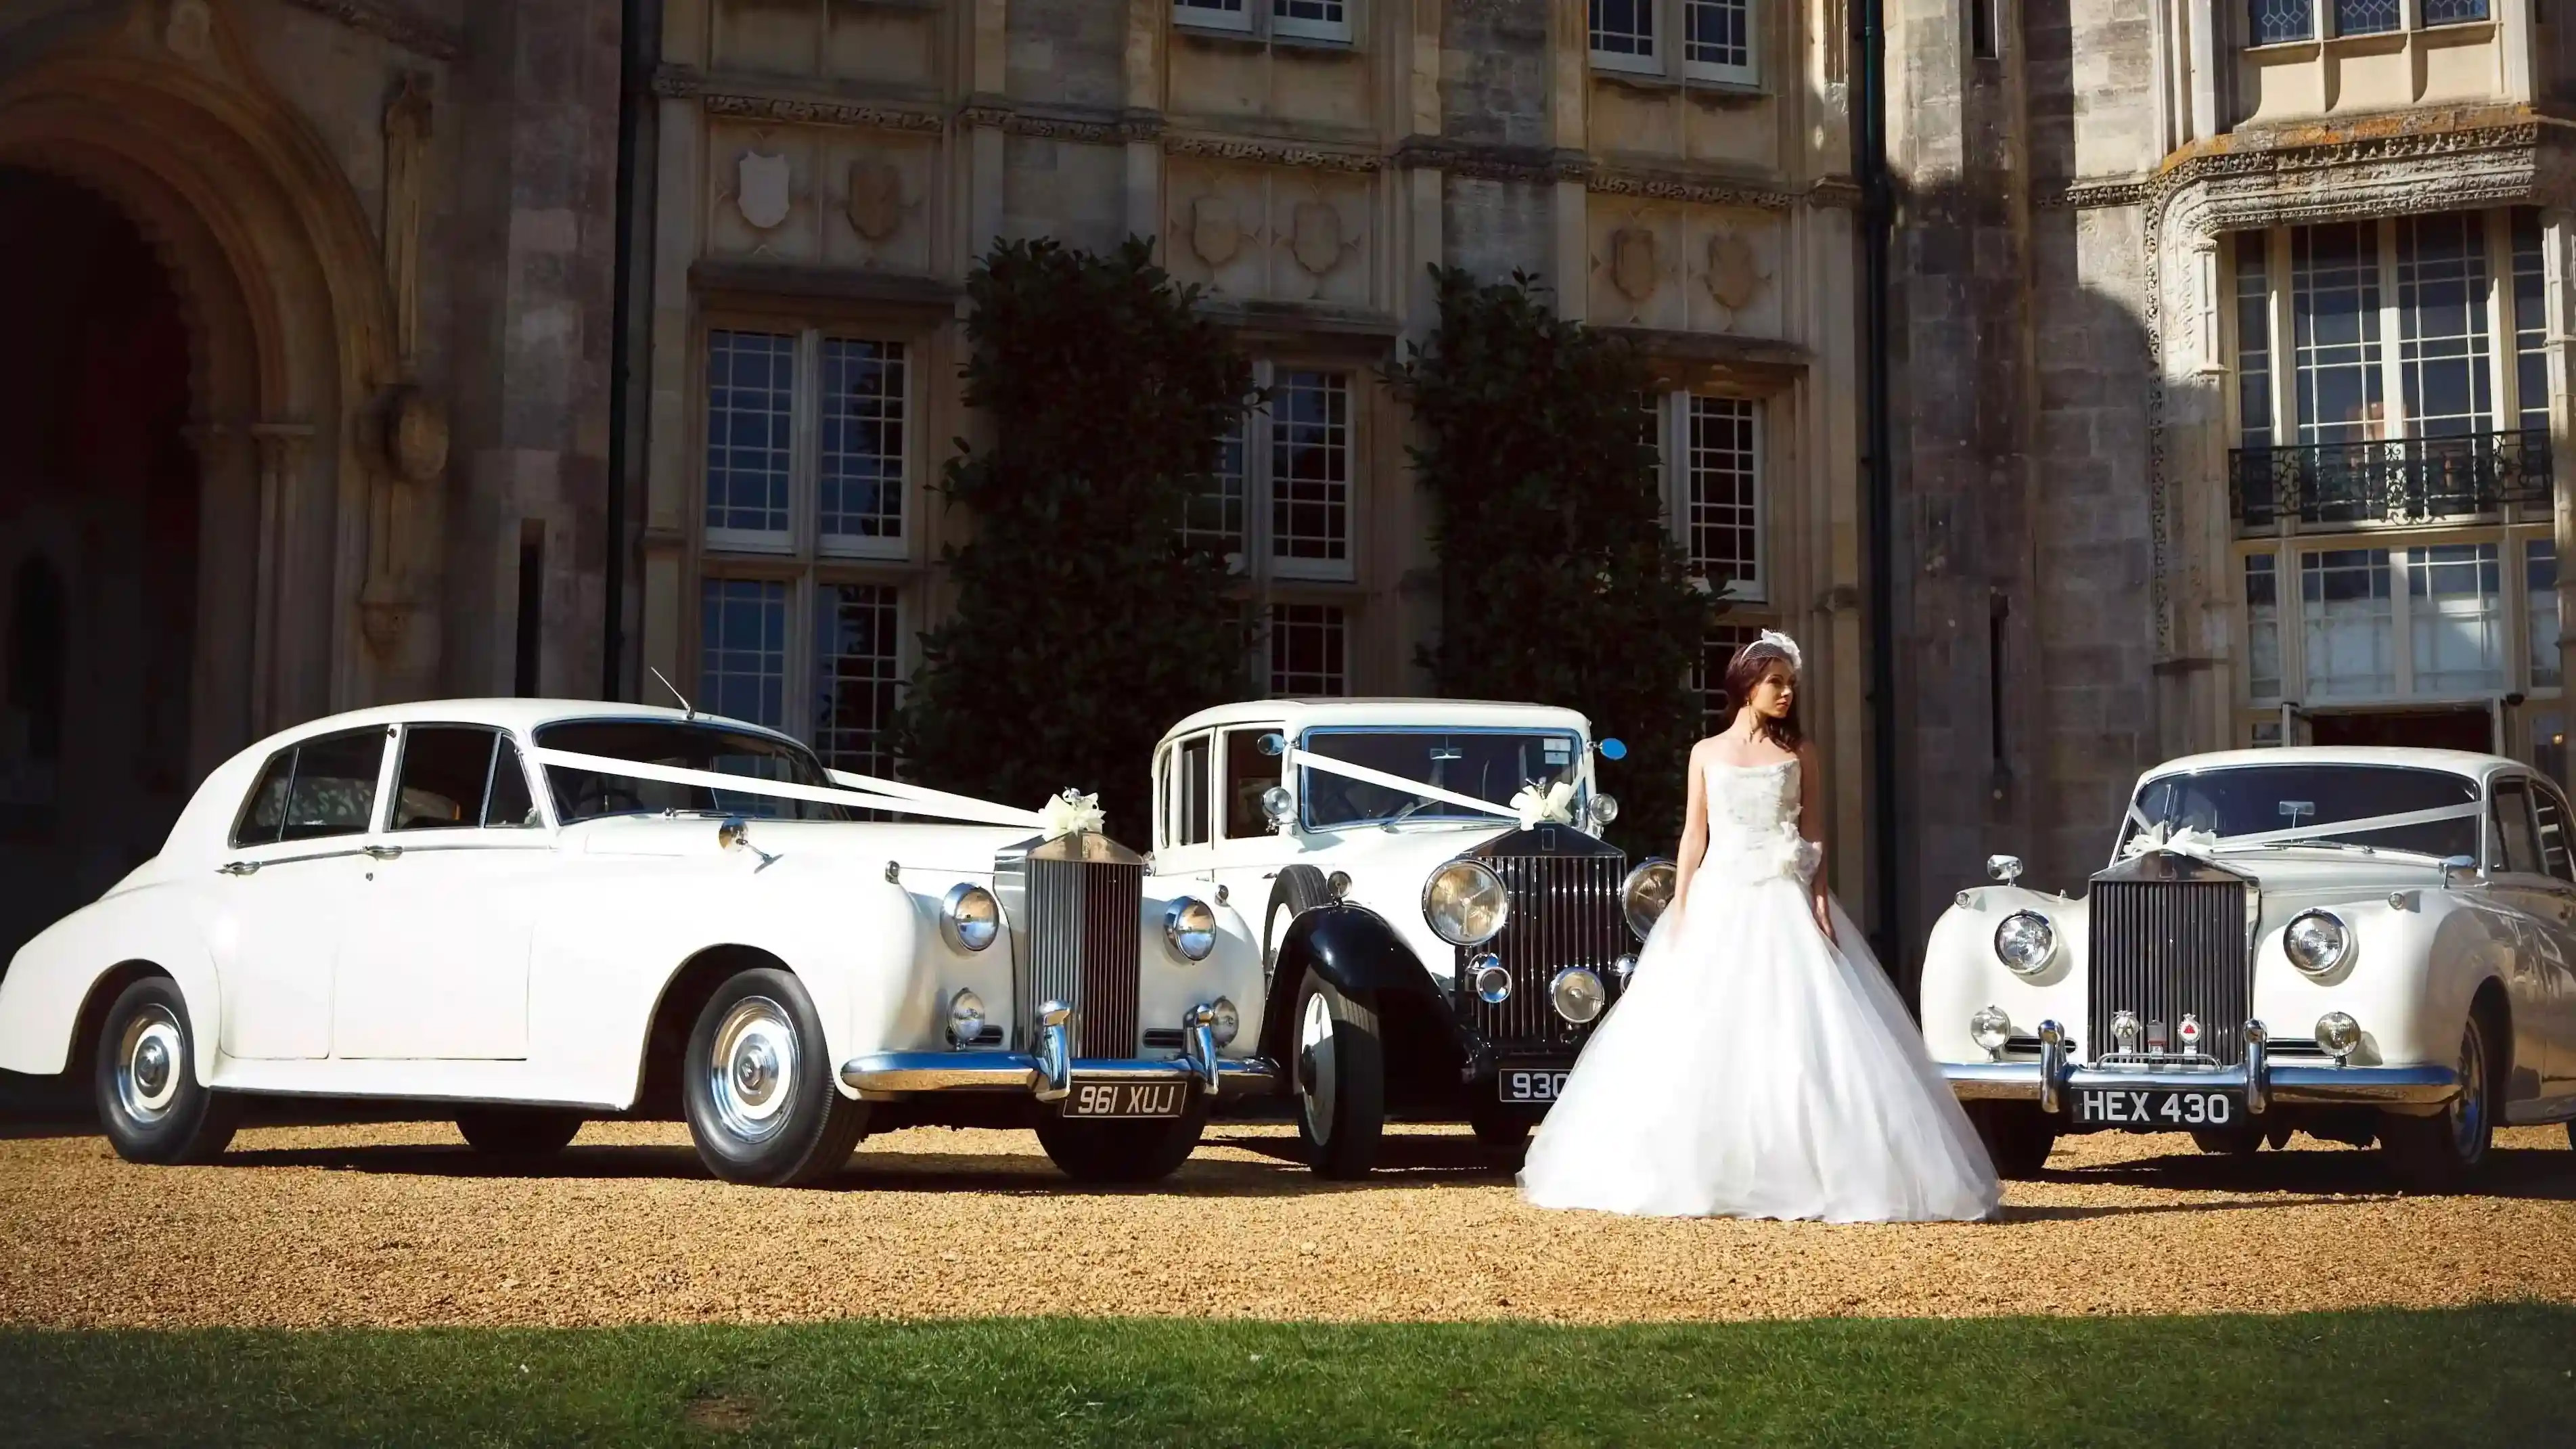 Selection of three classic and Vintage Rolls-Royce in White with Bride wearing a white wedding dress standing in the middle of the vehicles. Background is a wedding castle venue.